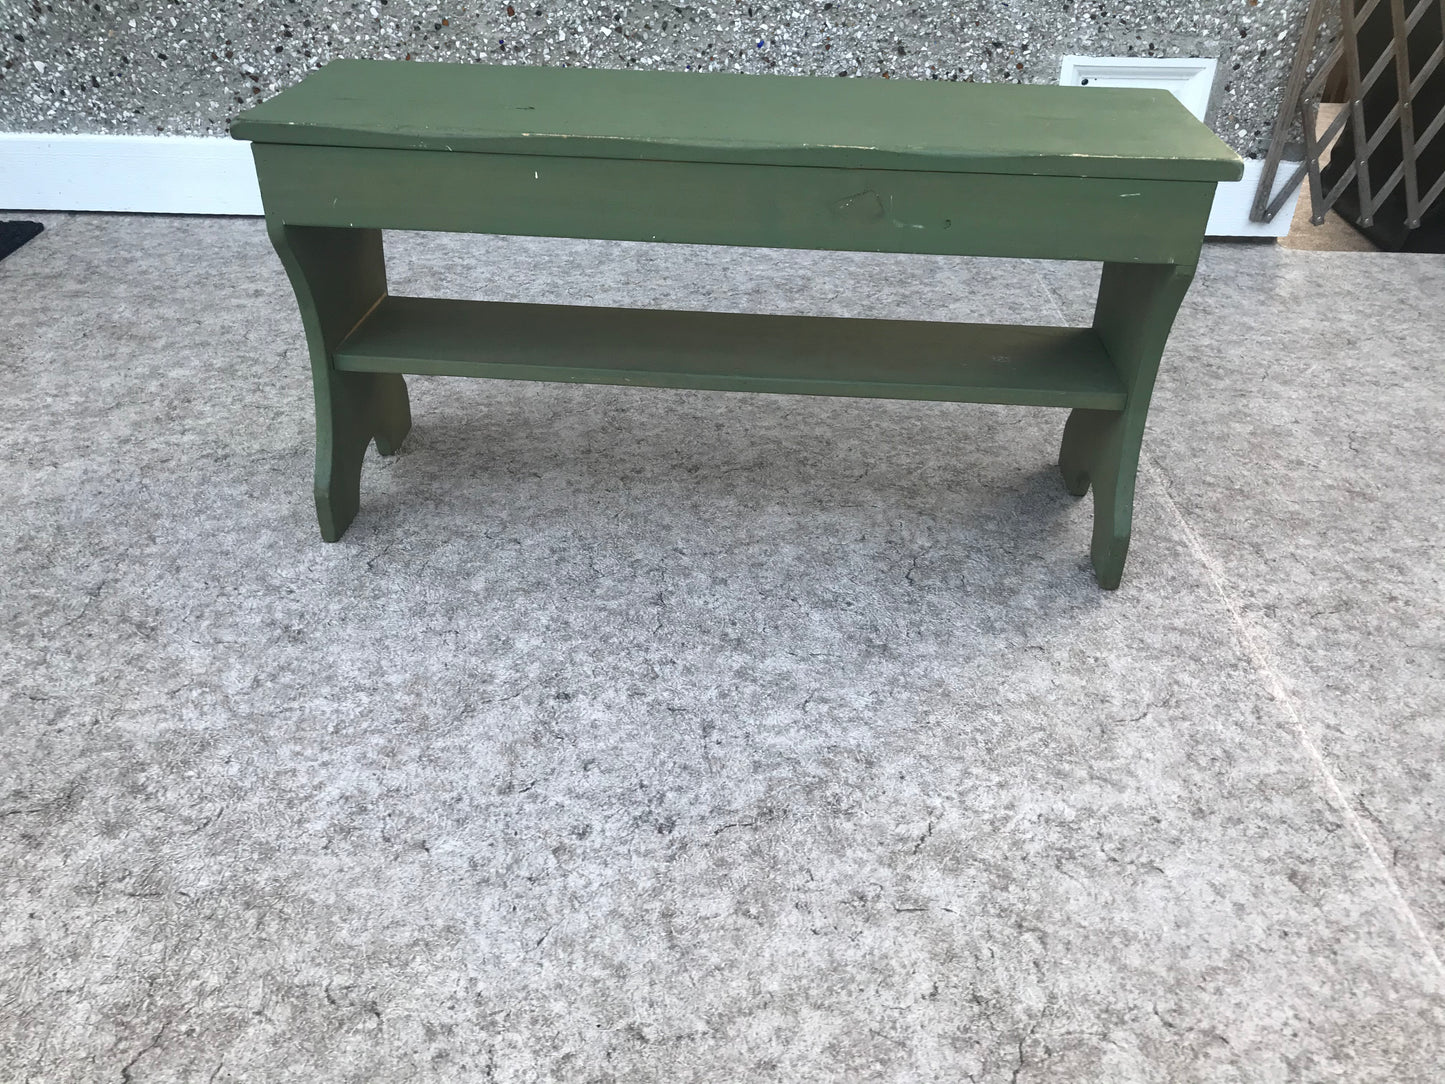 Garden Wood Bench 18 x 11 x 3 Solid Wood Well Made